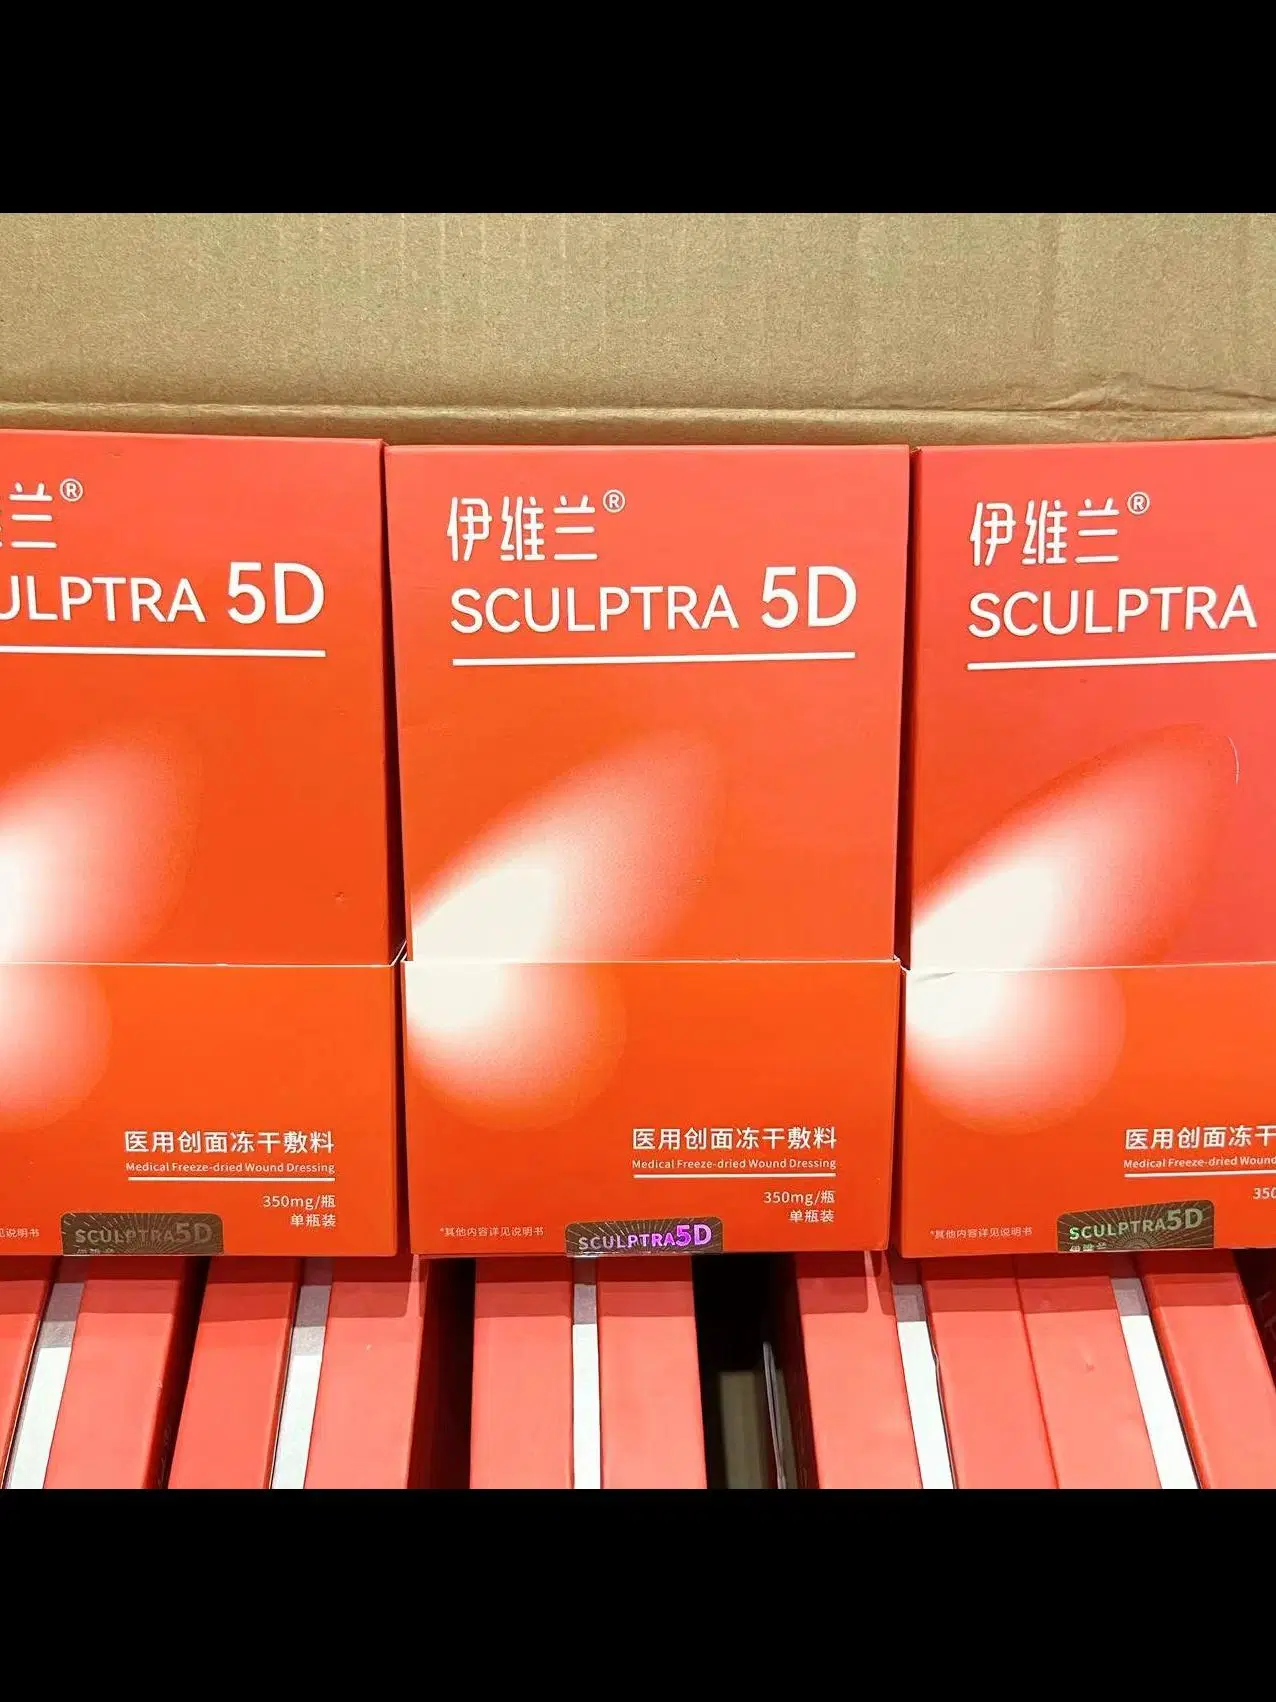 Facial Shaping Injection Sculp Tra 5D Premium Plla+Pcl Dermal Filler for Anti-Aging